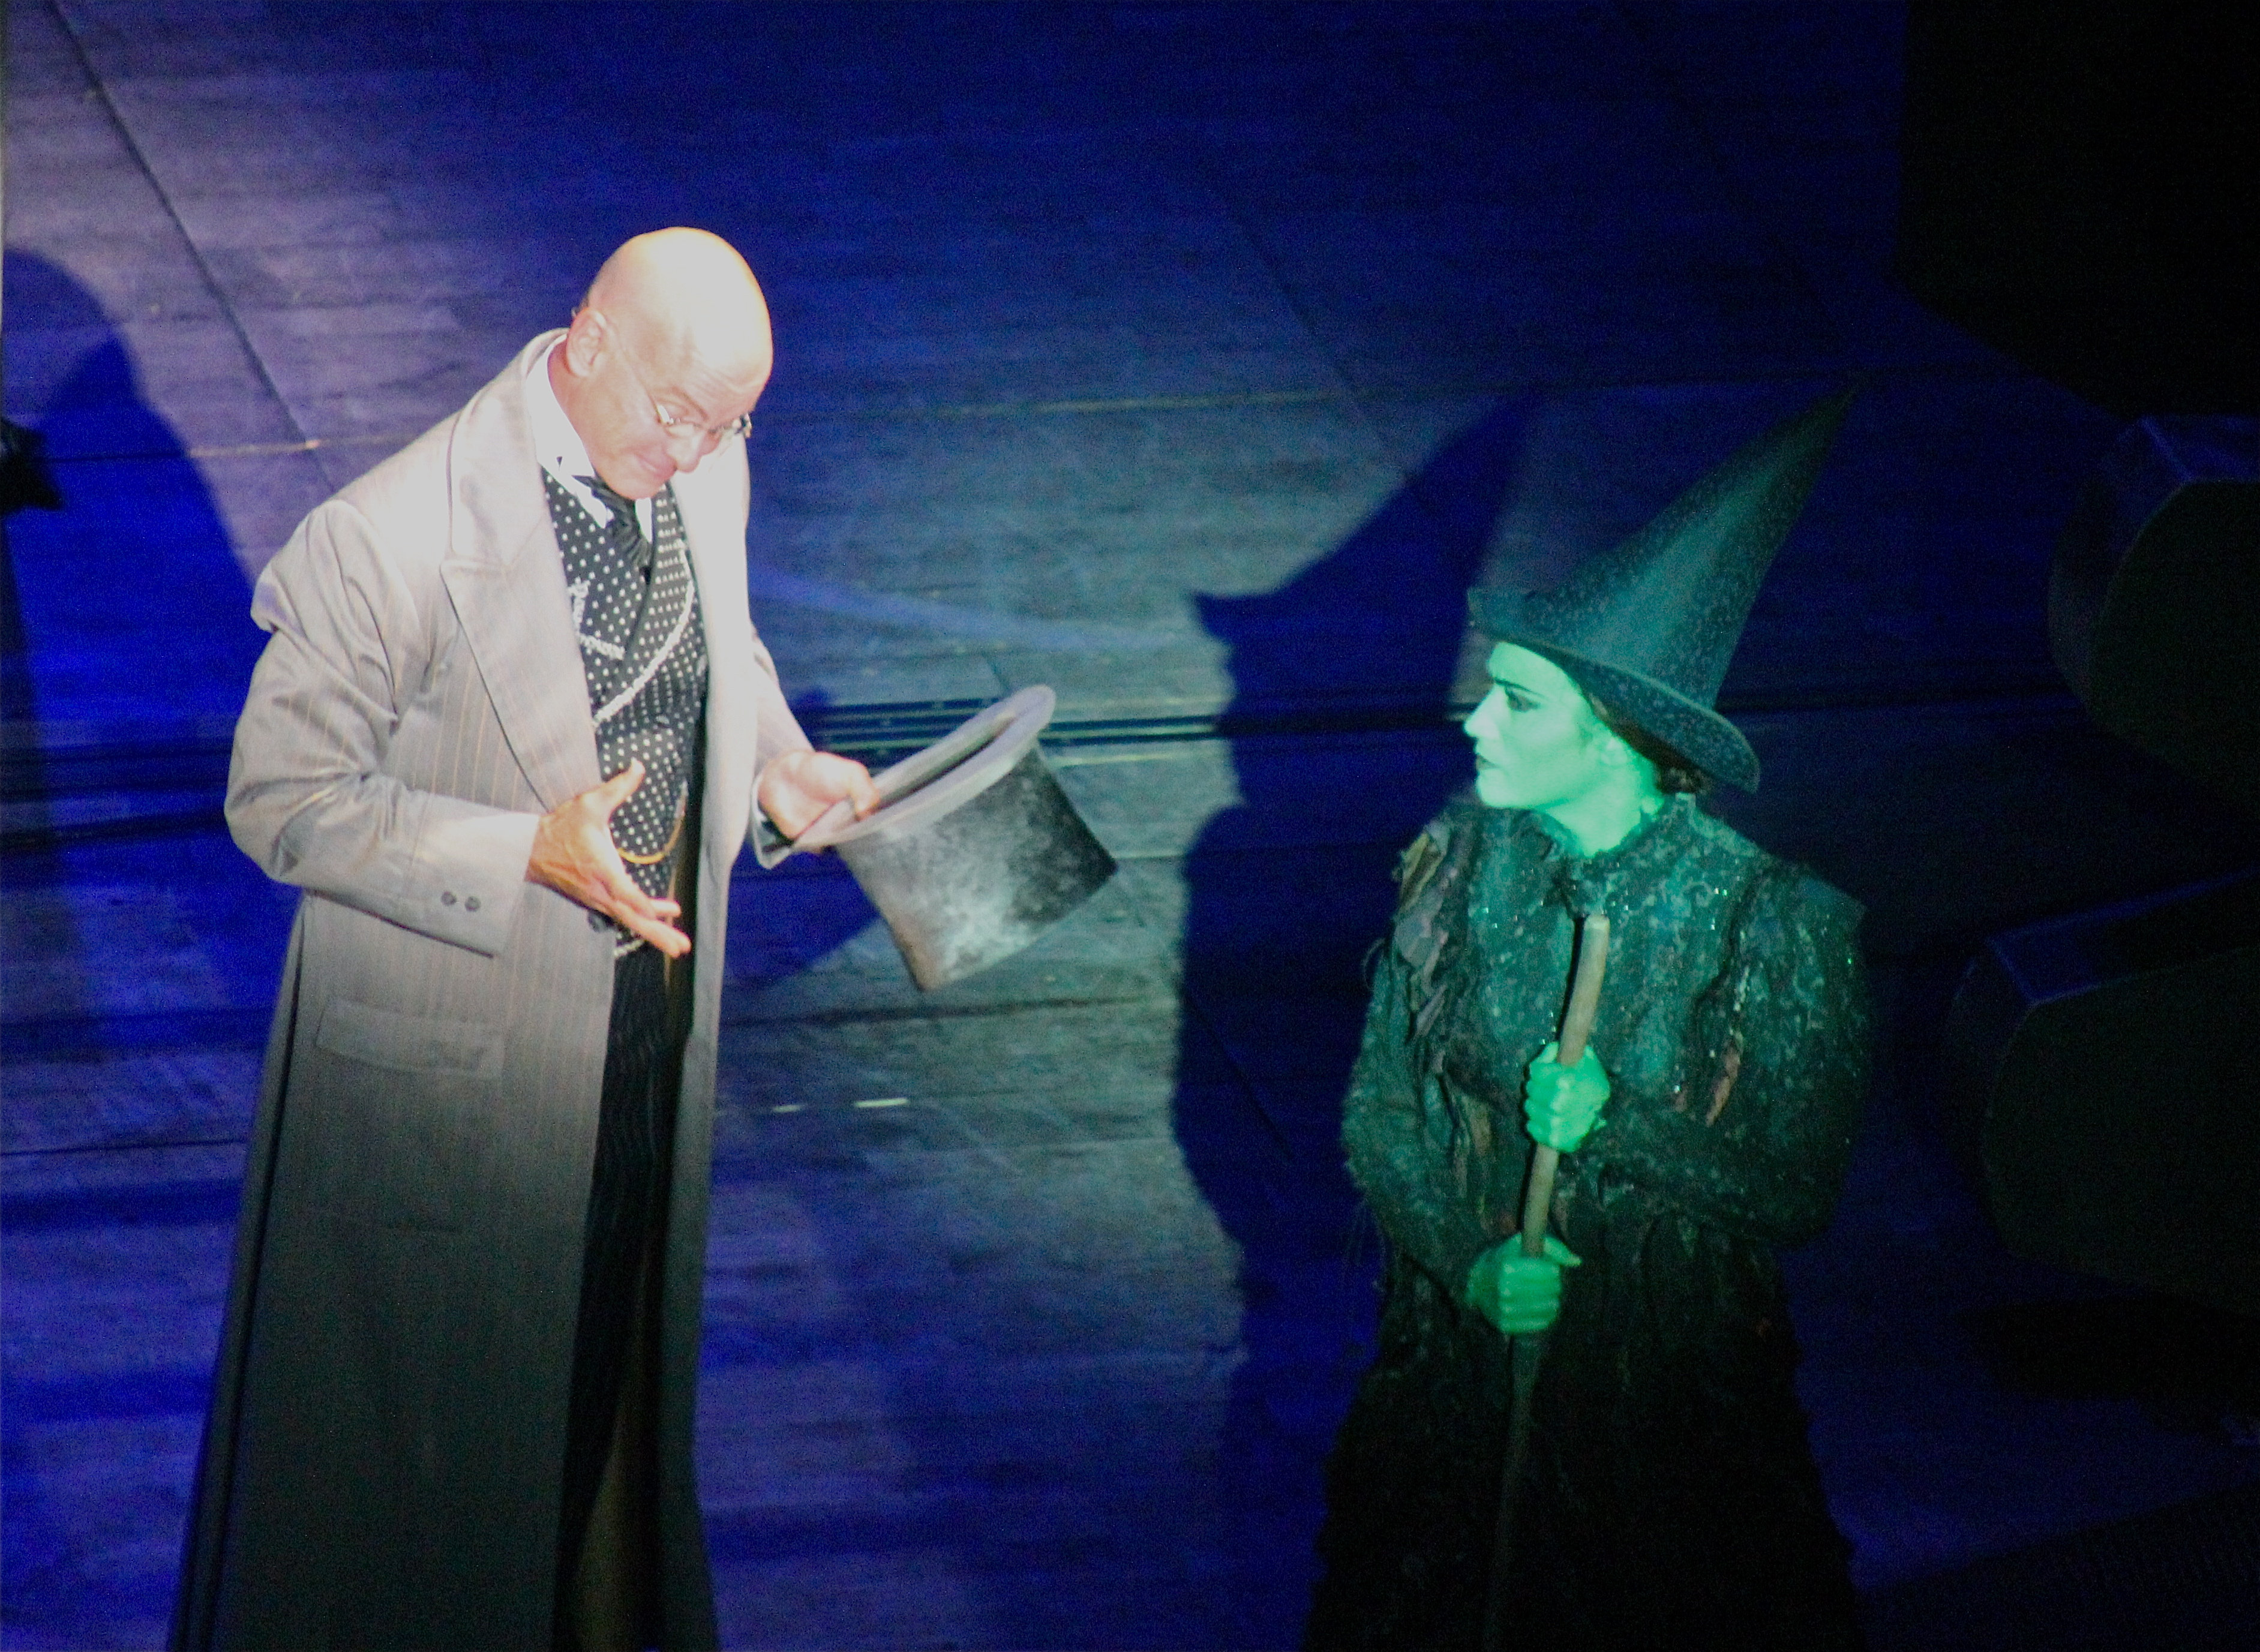 As the Wizard in WiCKED w/ Eden Espinosa.